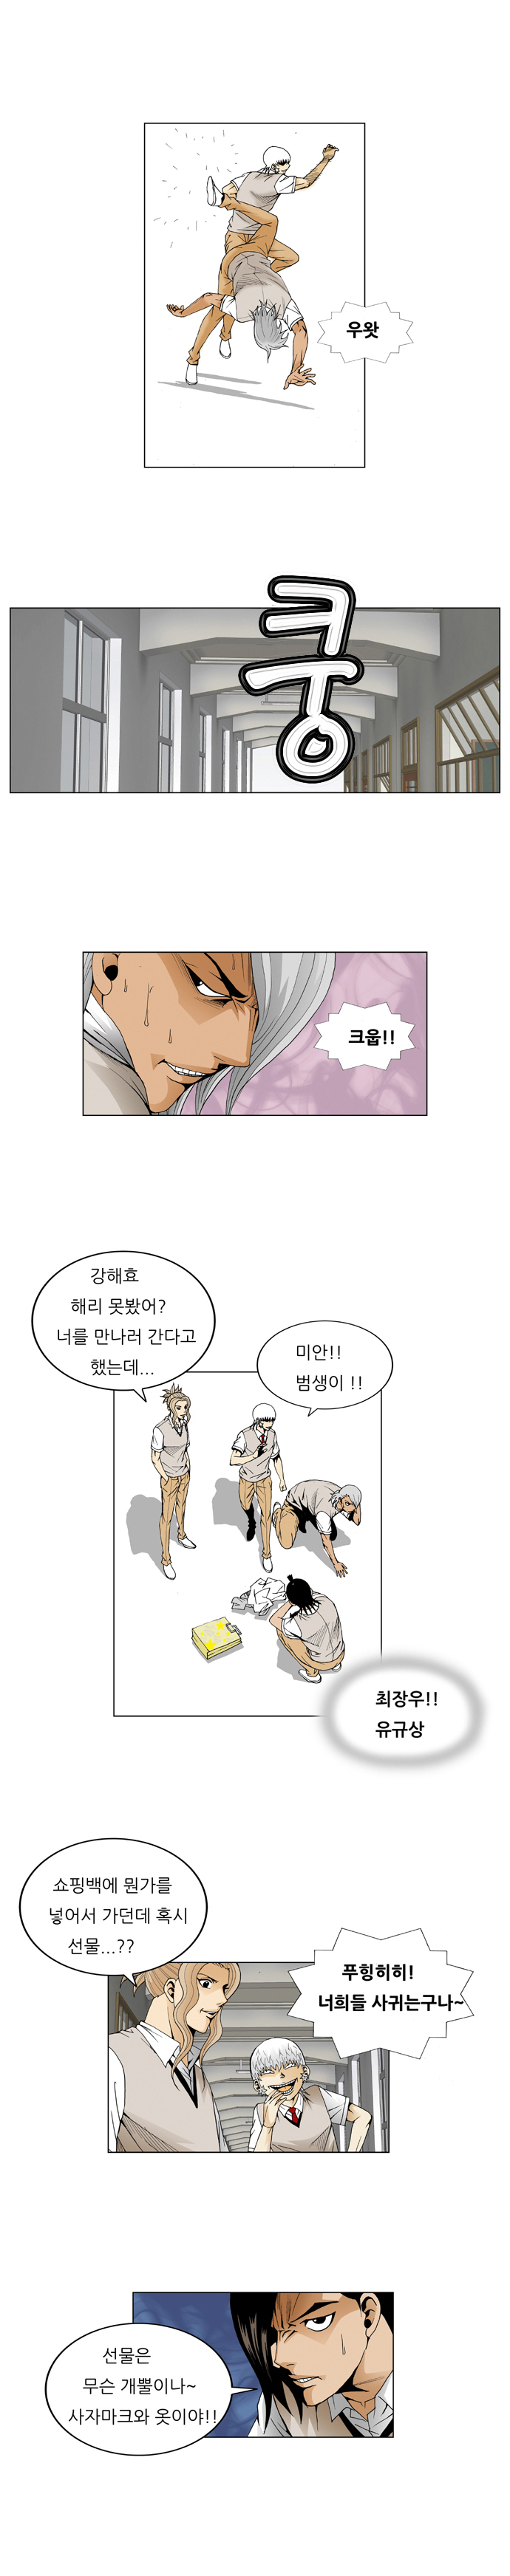 Ultimate Legend - Kang Hae Hyo - Chapter 43 - Page 3